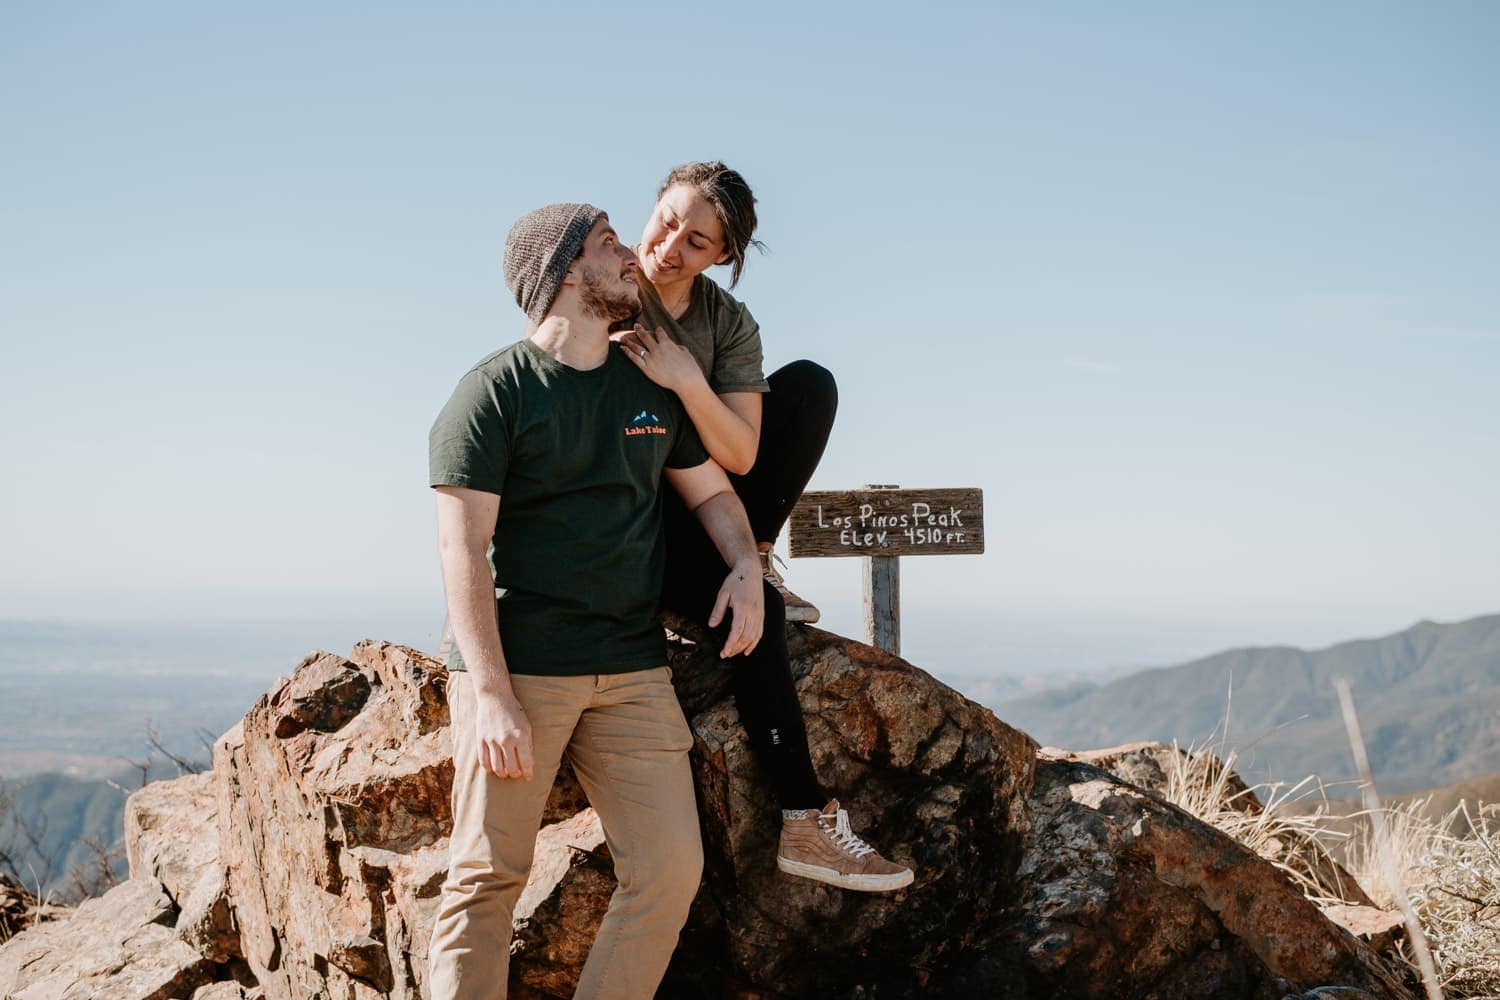 A couple is pictured at Los Pinos Peak, which is at an elevation of 4510 feet, as indicated by the sign. They are enjoying a sunny day outdoors, with the man standing and the woman seated on a rock, her legs draped over his. They appear to be sharing a light-hearted, affectionate moment against a backdrop of distant mountains and clear skies.